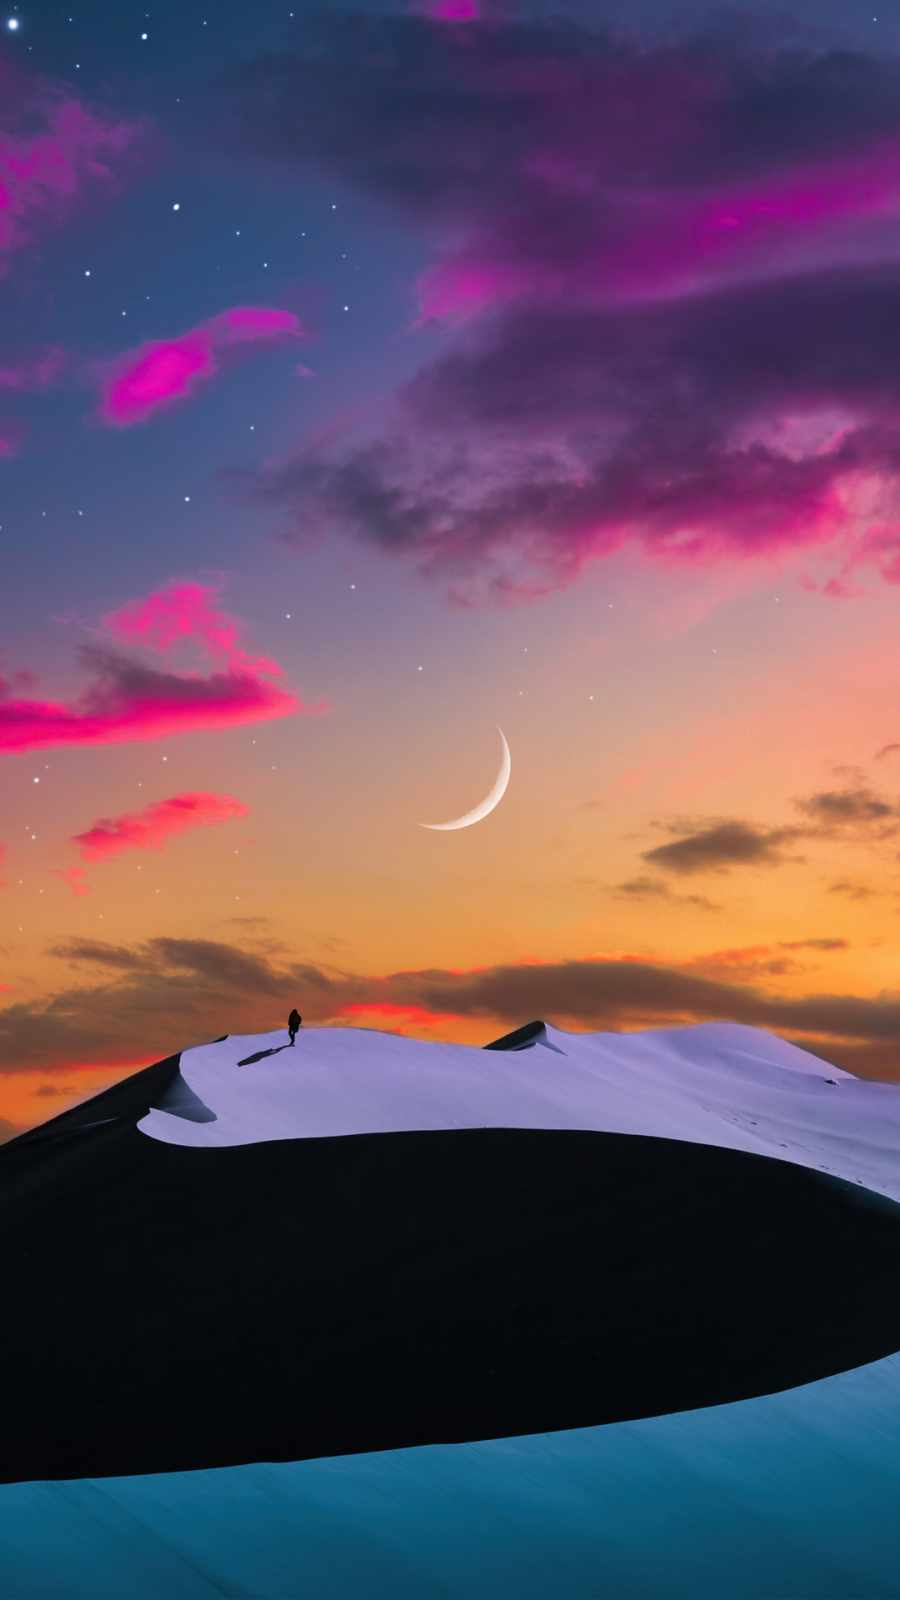 Walking In Ethereal Dusk IPhone Wallpaper  IPhone Wallpapers